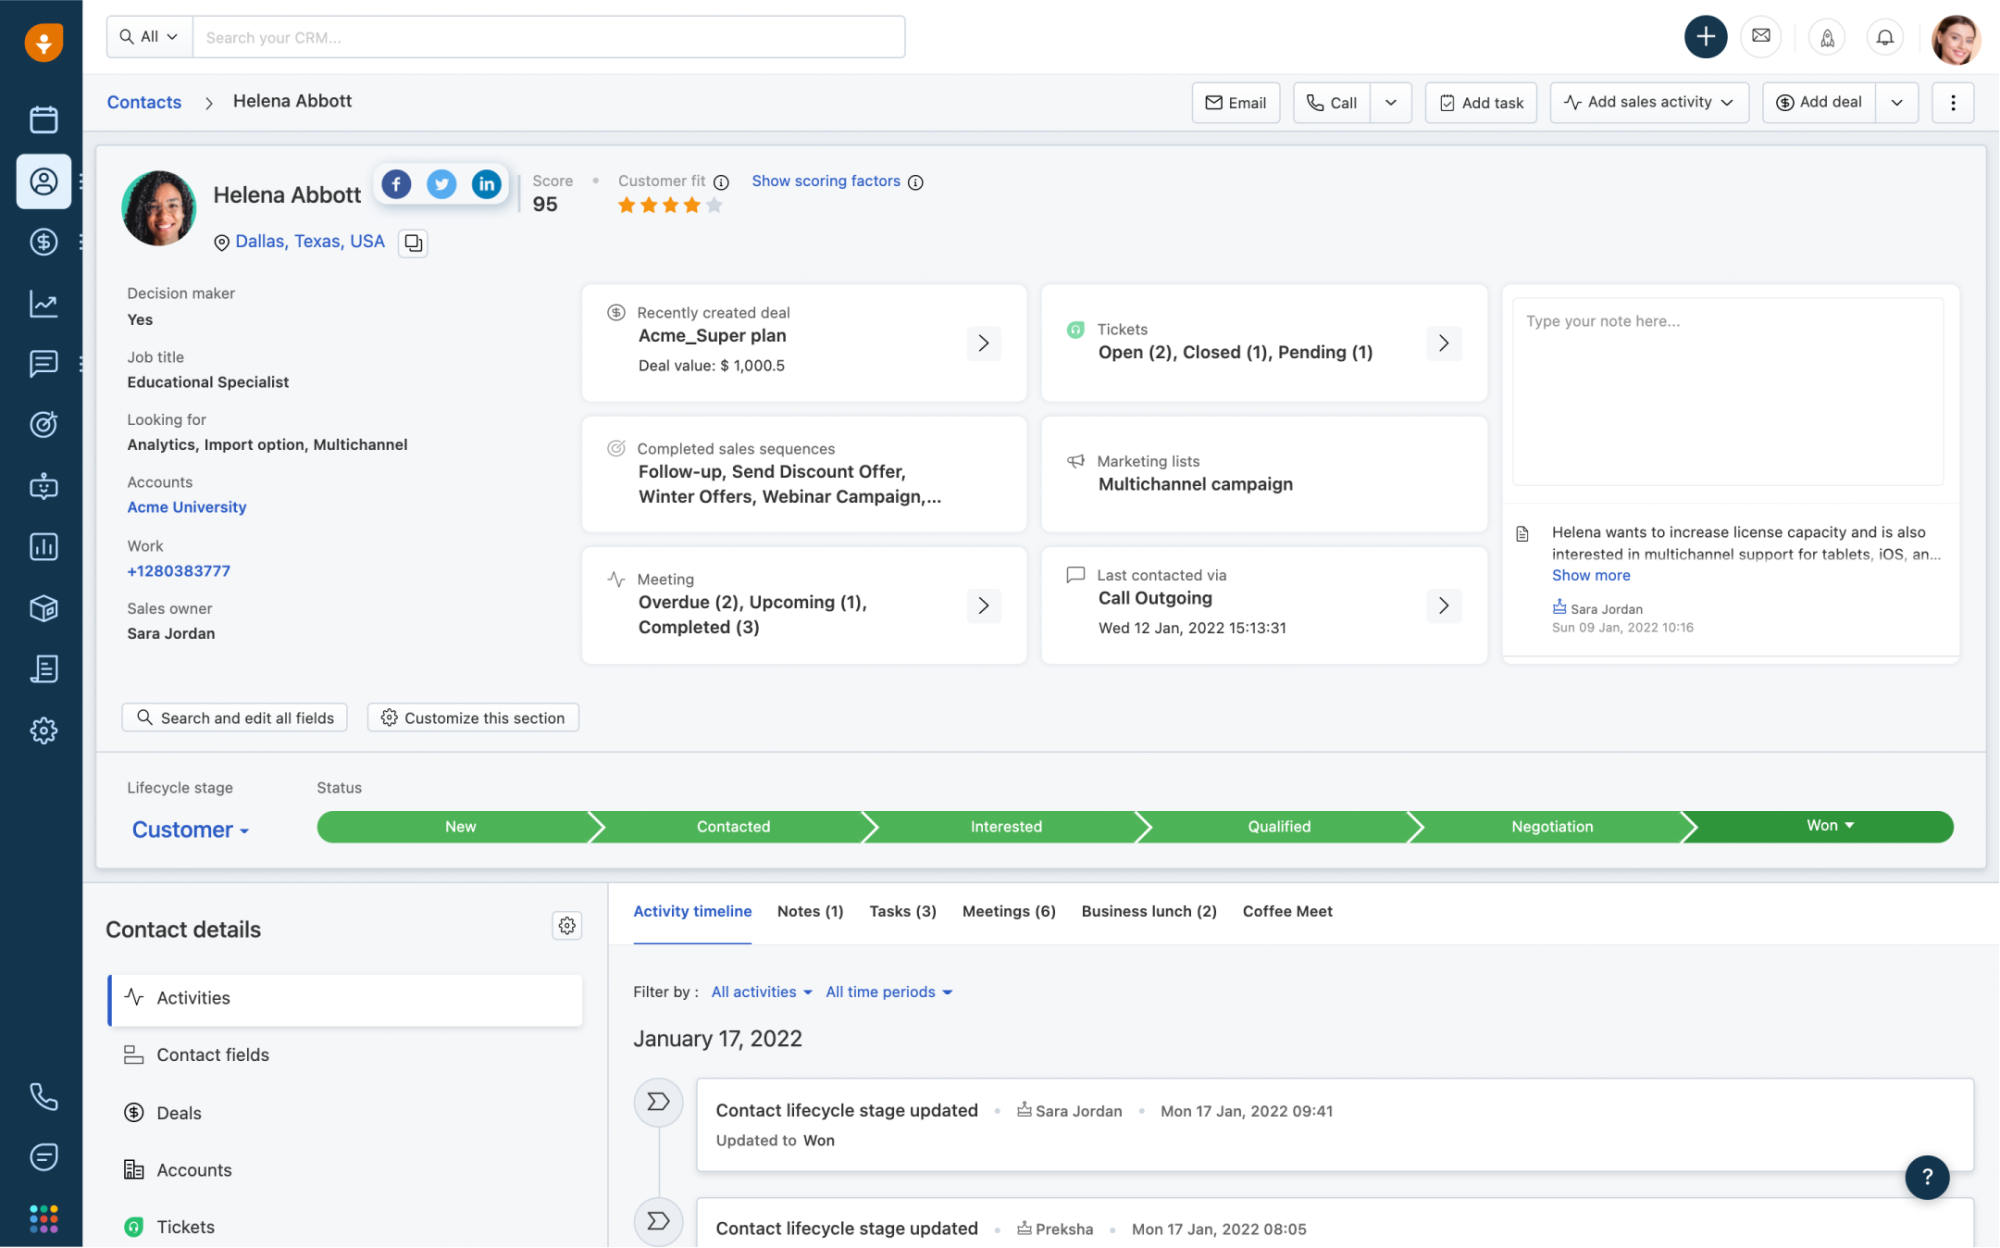 A screenshot of the client profile view in Freshsales CRM software.